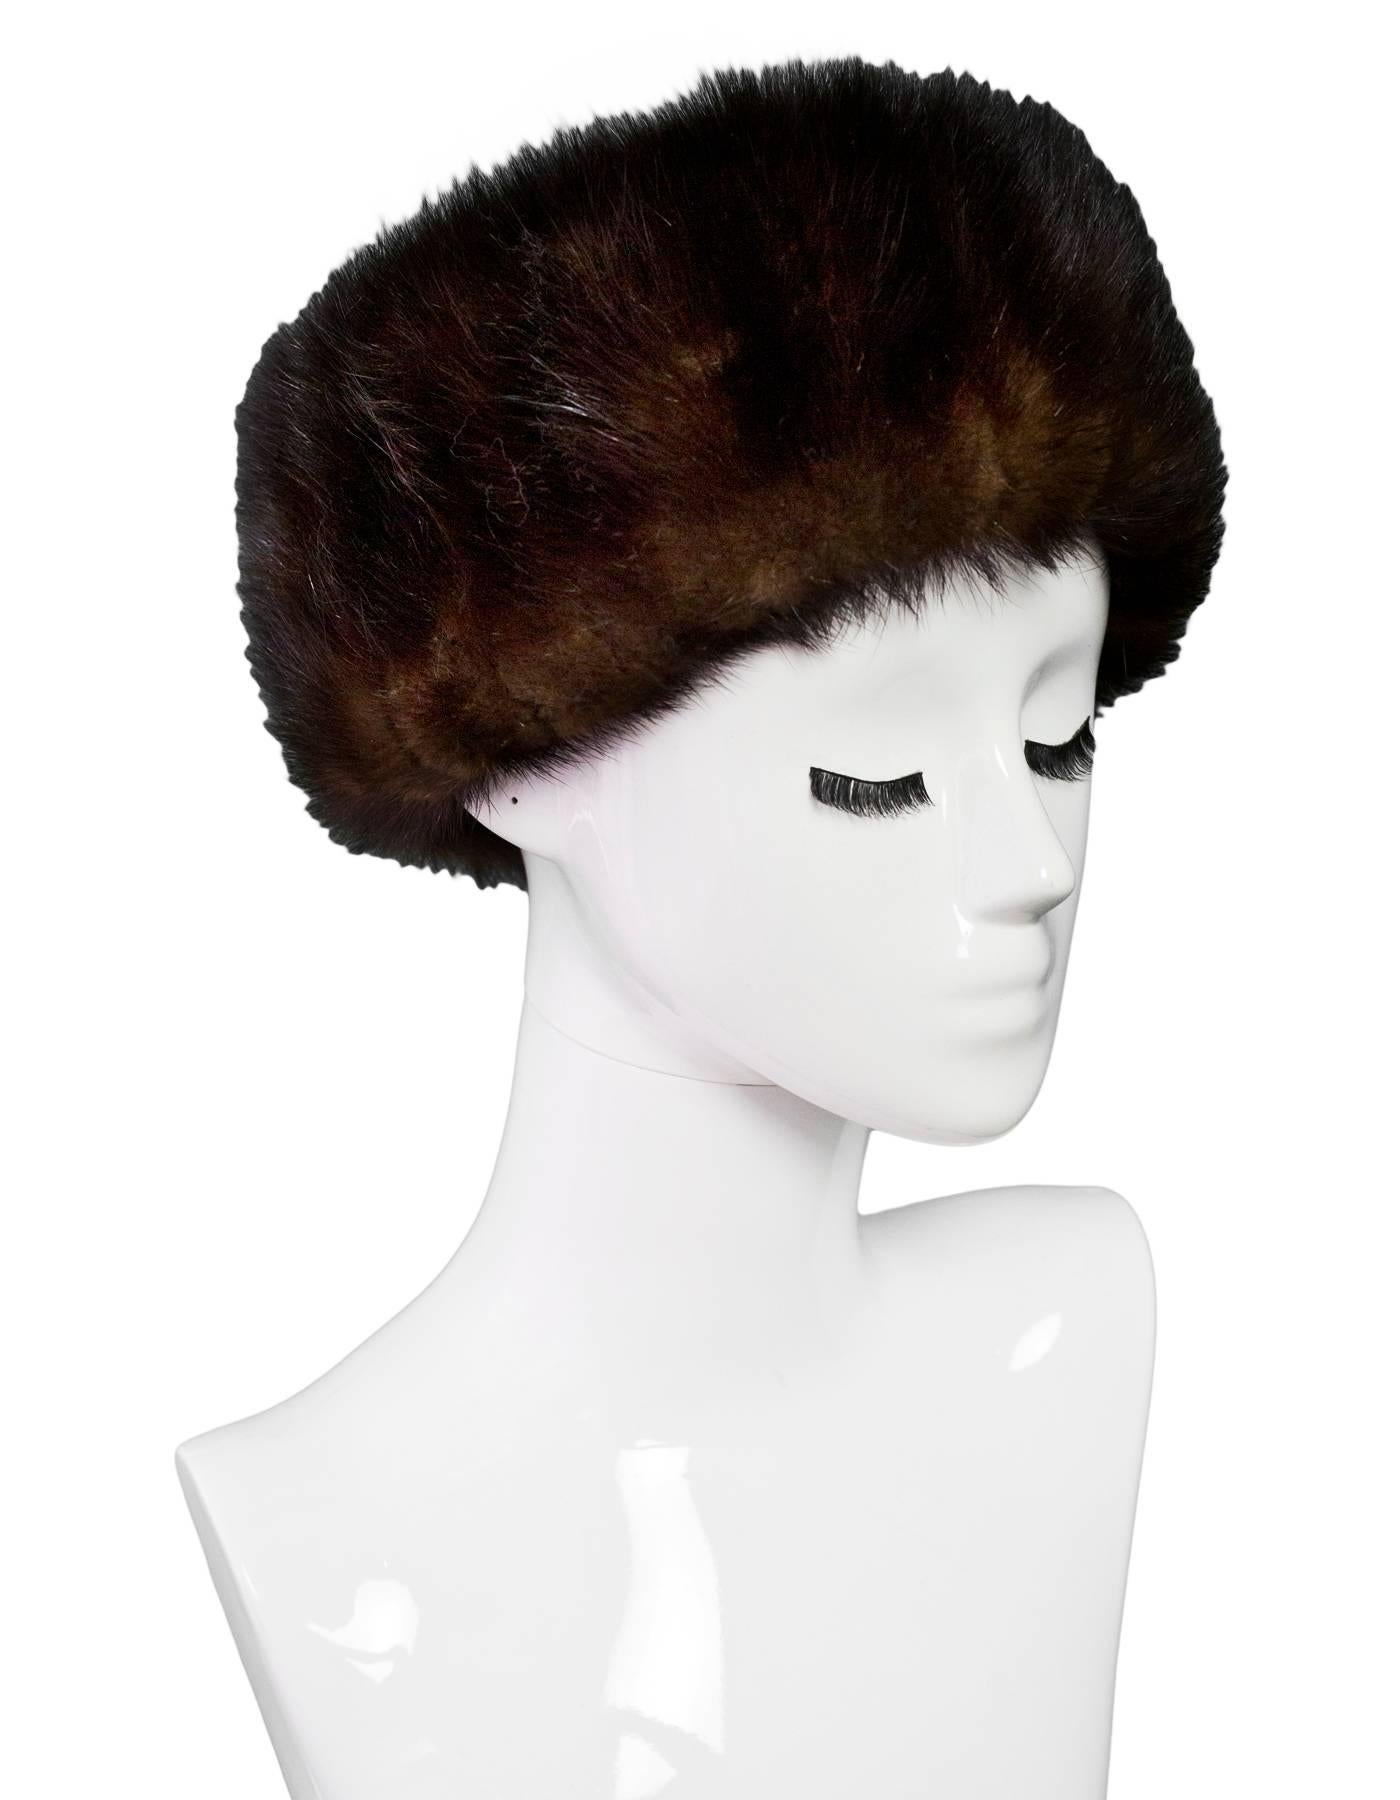 Brown Mink Fur Hat

Color: Brown
Materials: Not listed, feels like mink
Overall Condition: Excellent pre-owned condition, light creasing at hat structure
Measurements:

Interior Diameter: 8